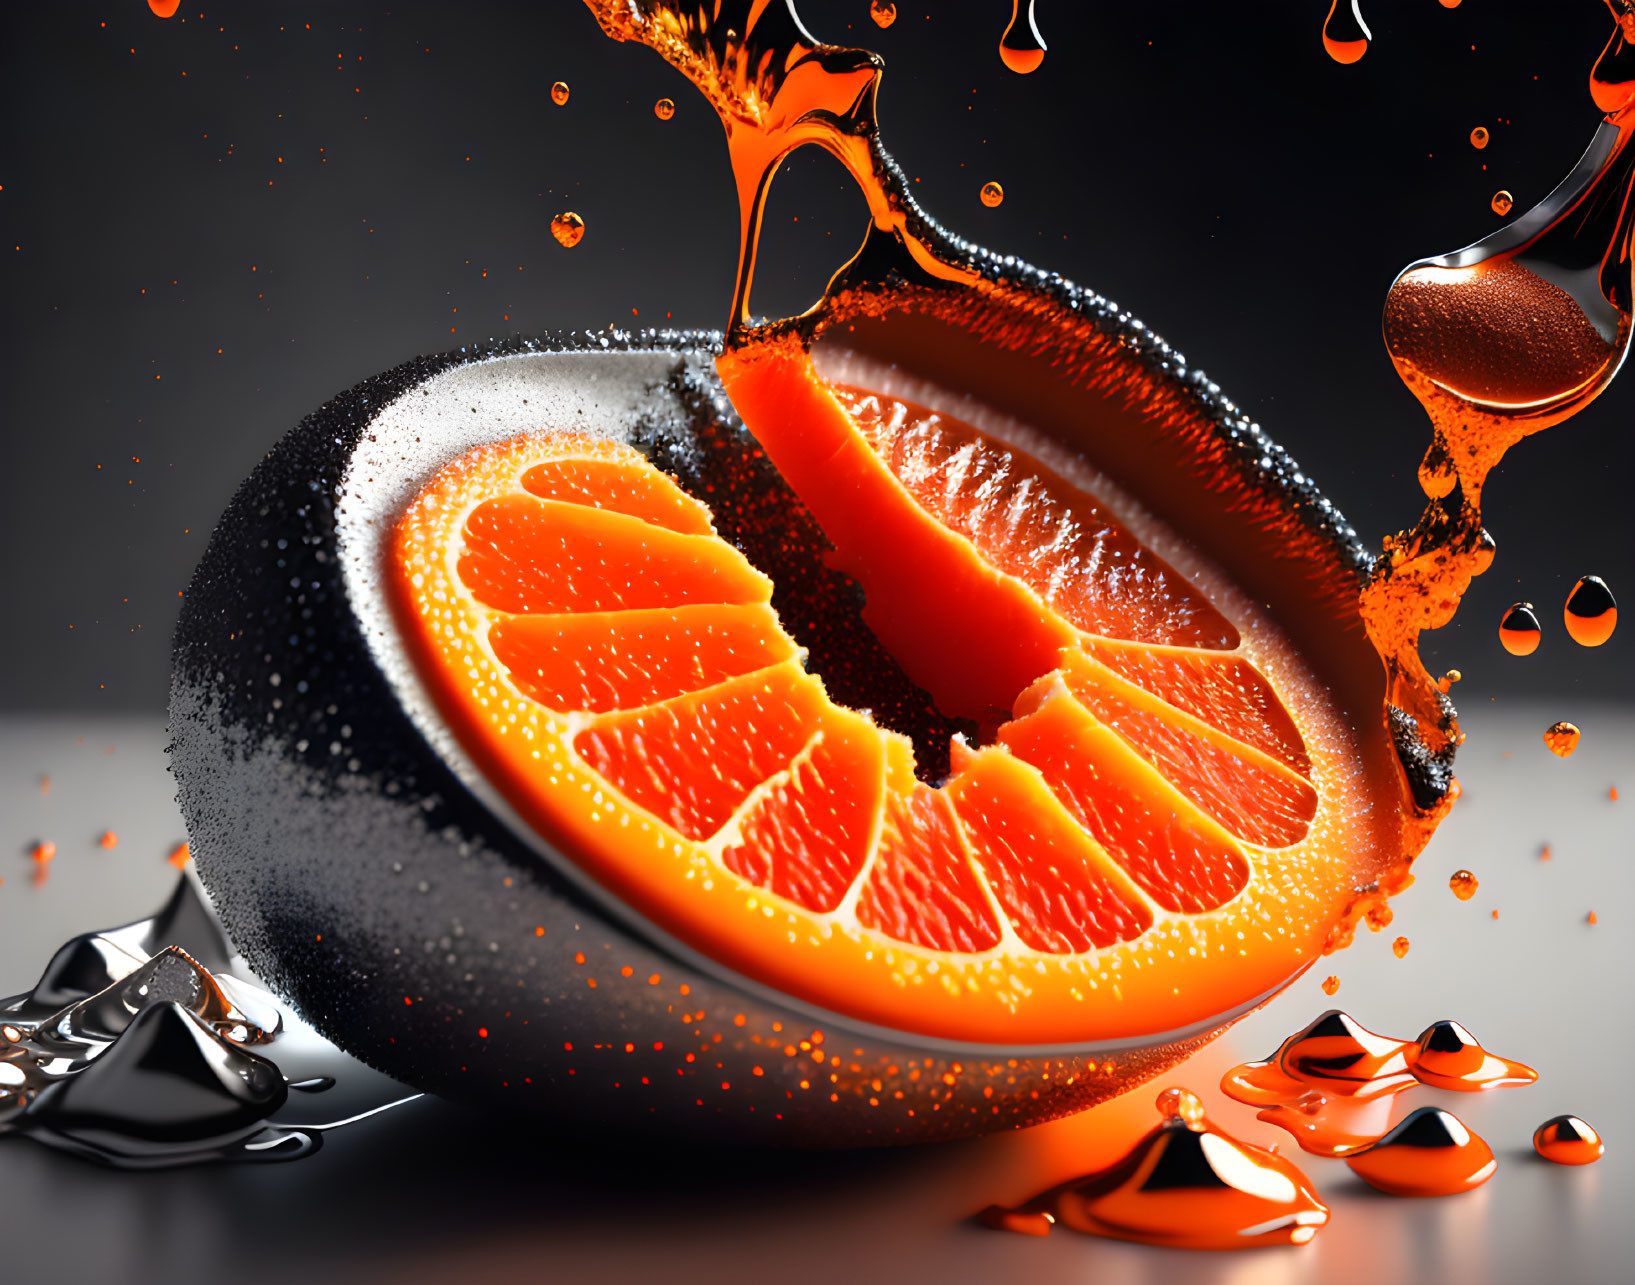 Bright orange slice with droplets and dynamic splash on reflective surface